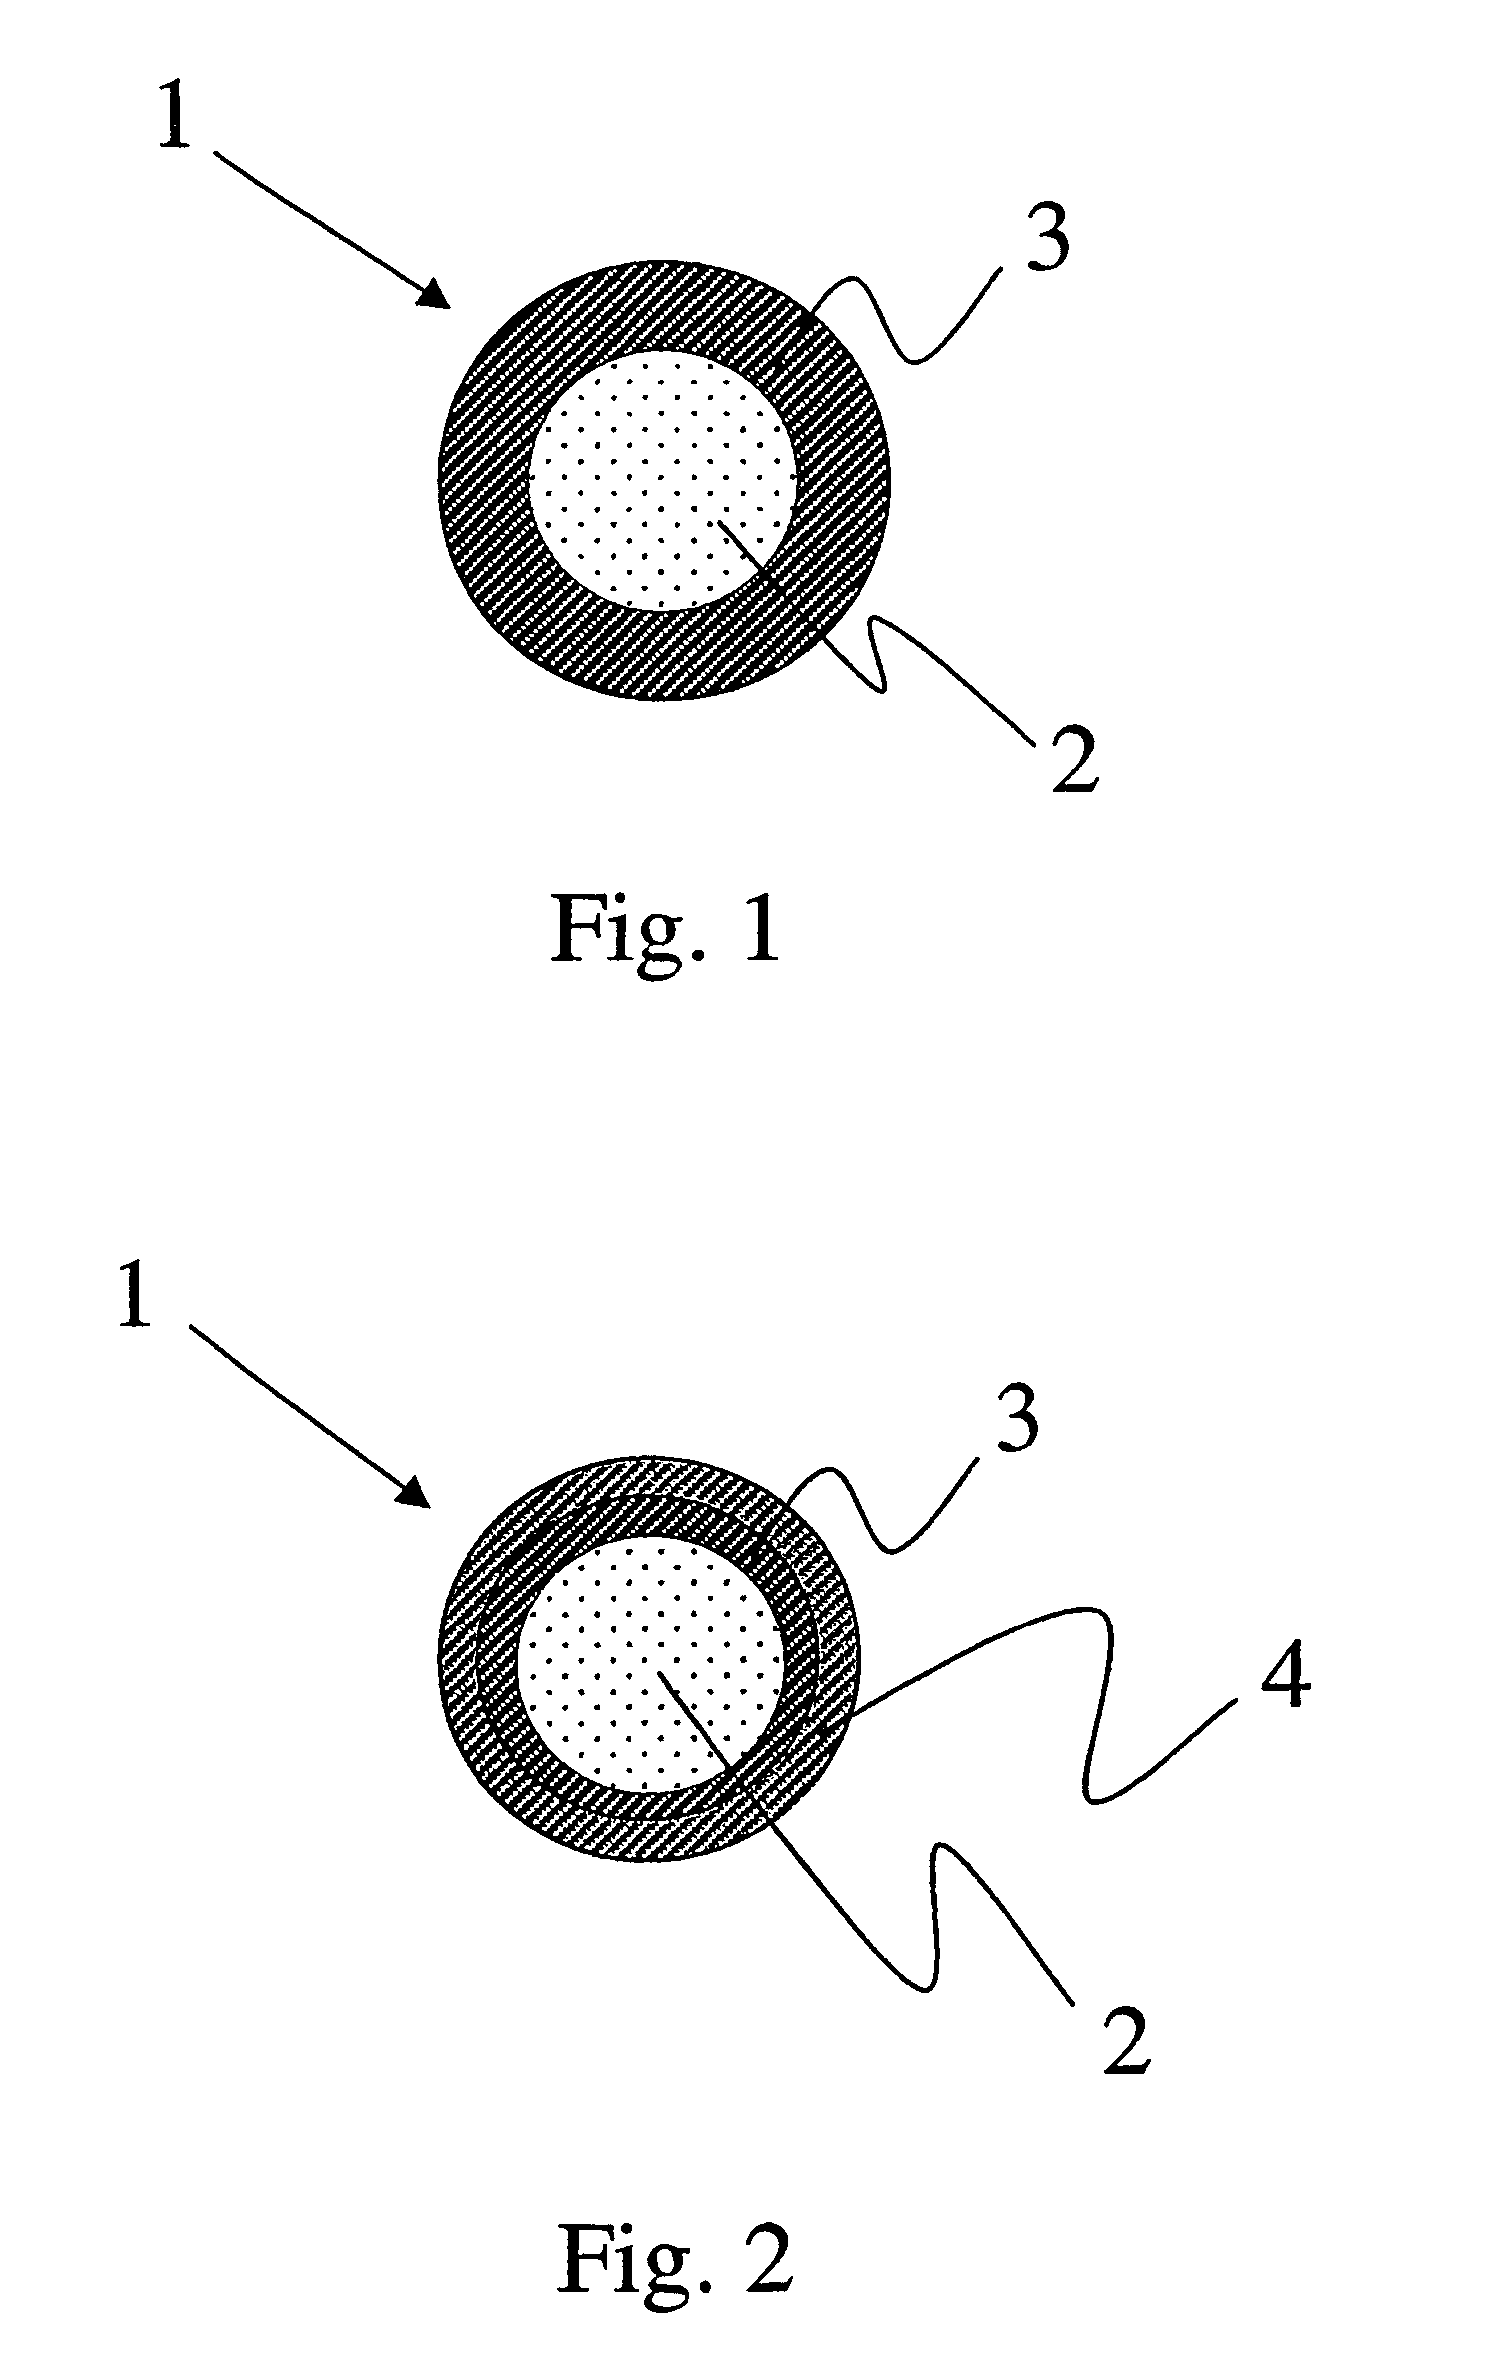 Optical fiber with thermoplastic material based coating